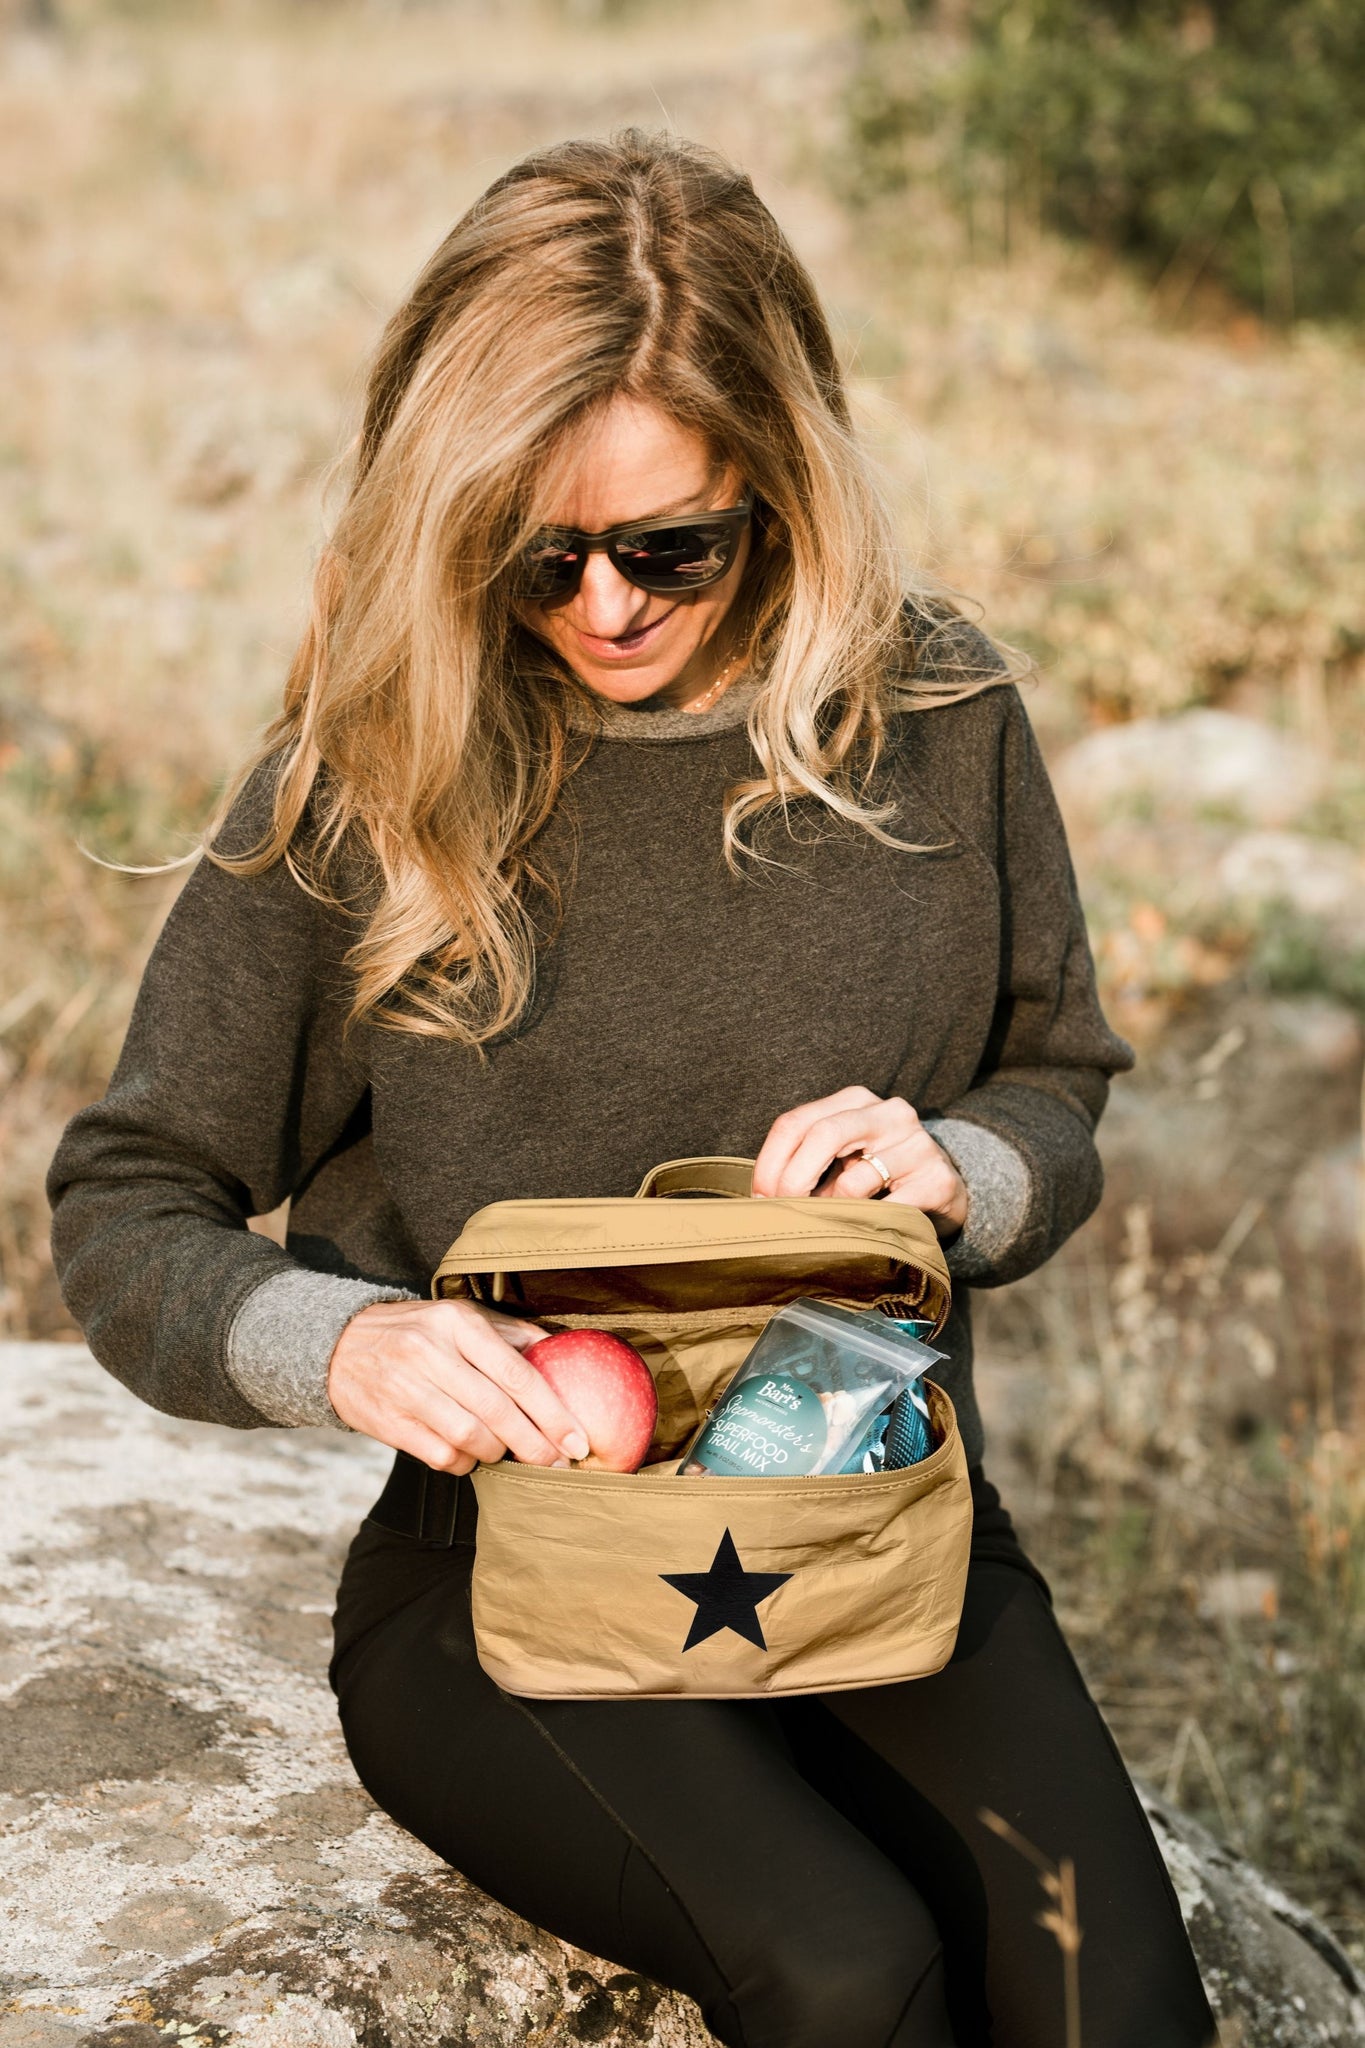 Cosmetic Case or Lunch Box in Gold with Black Star